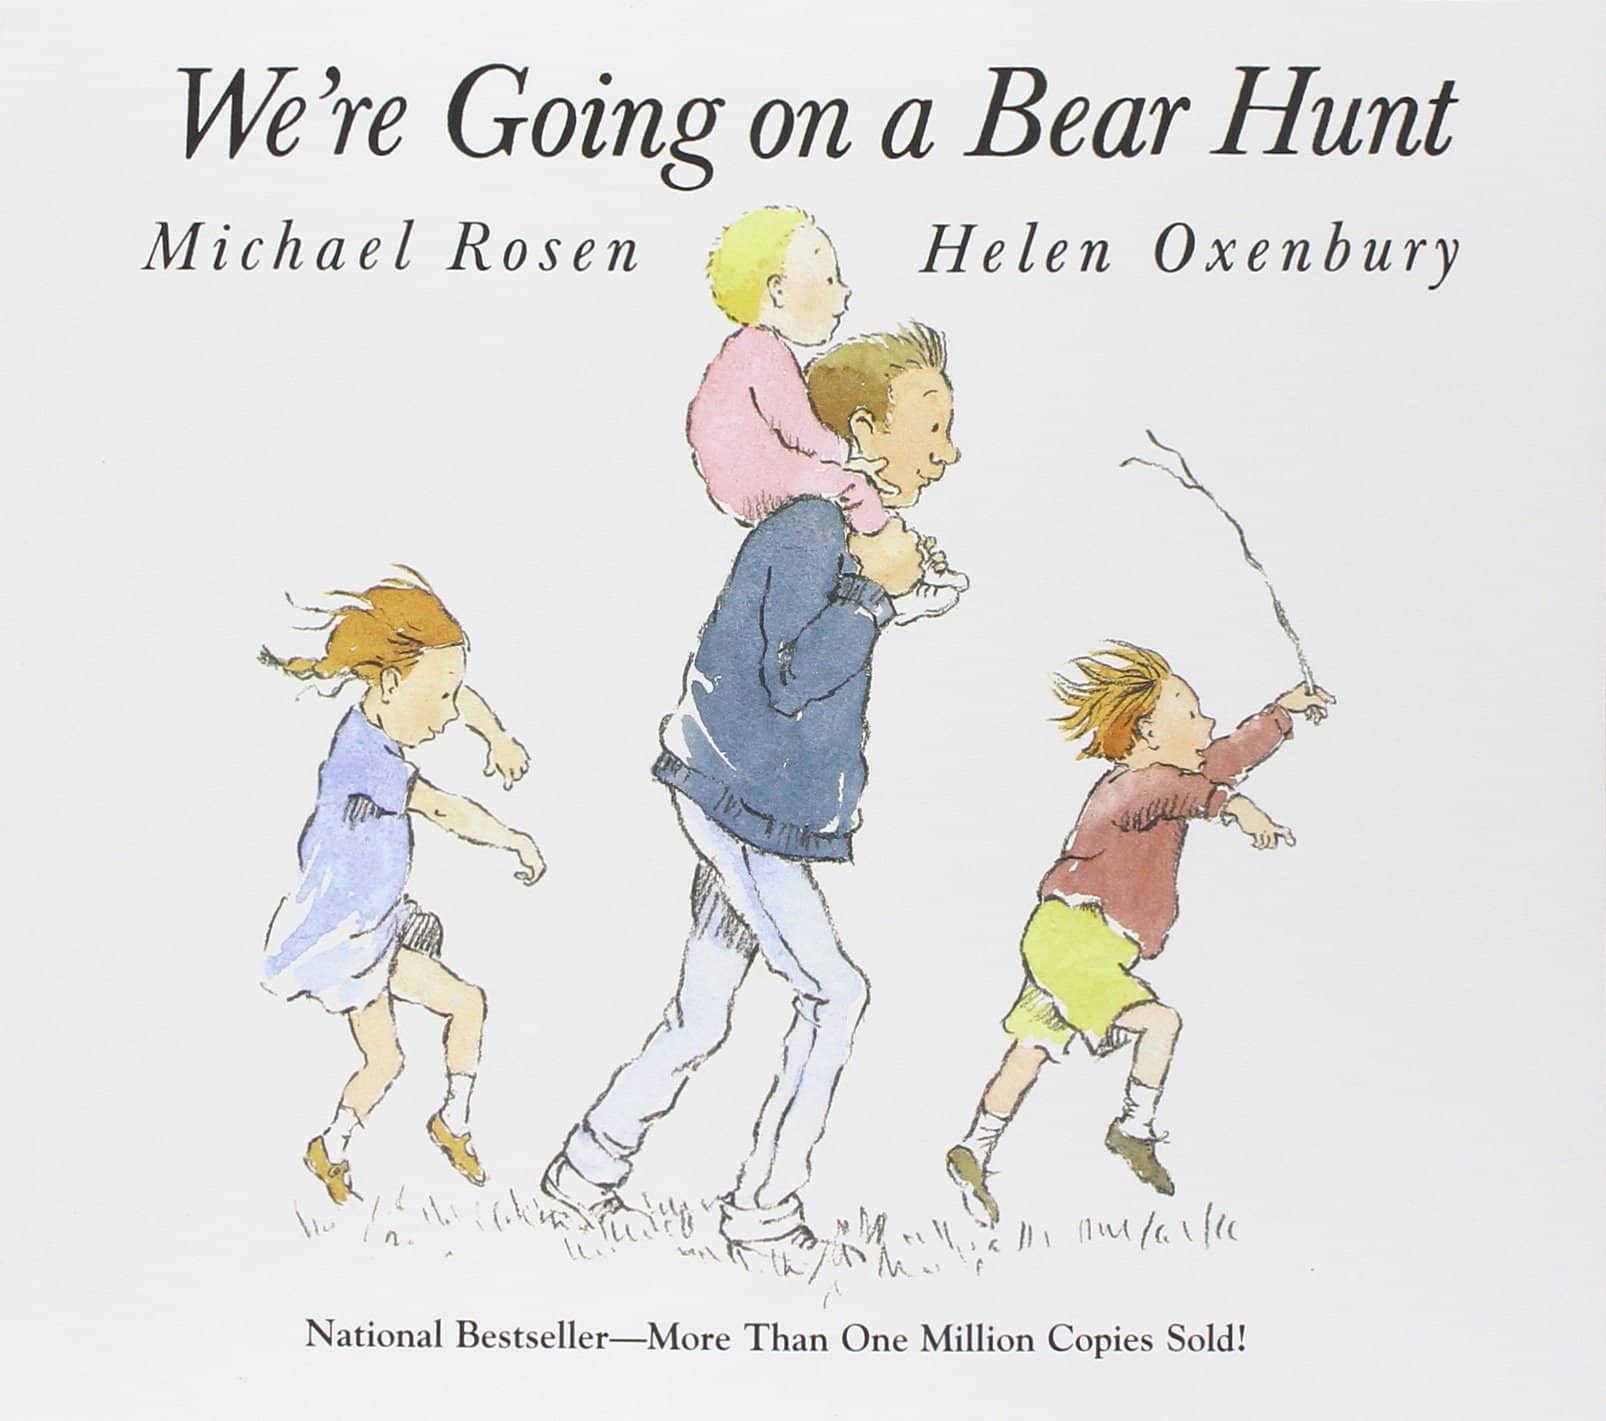 The cover for the book We're Going on a Bear Hunt